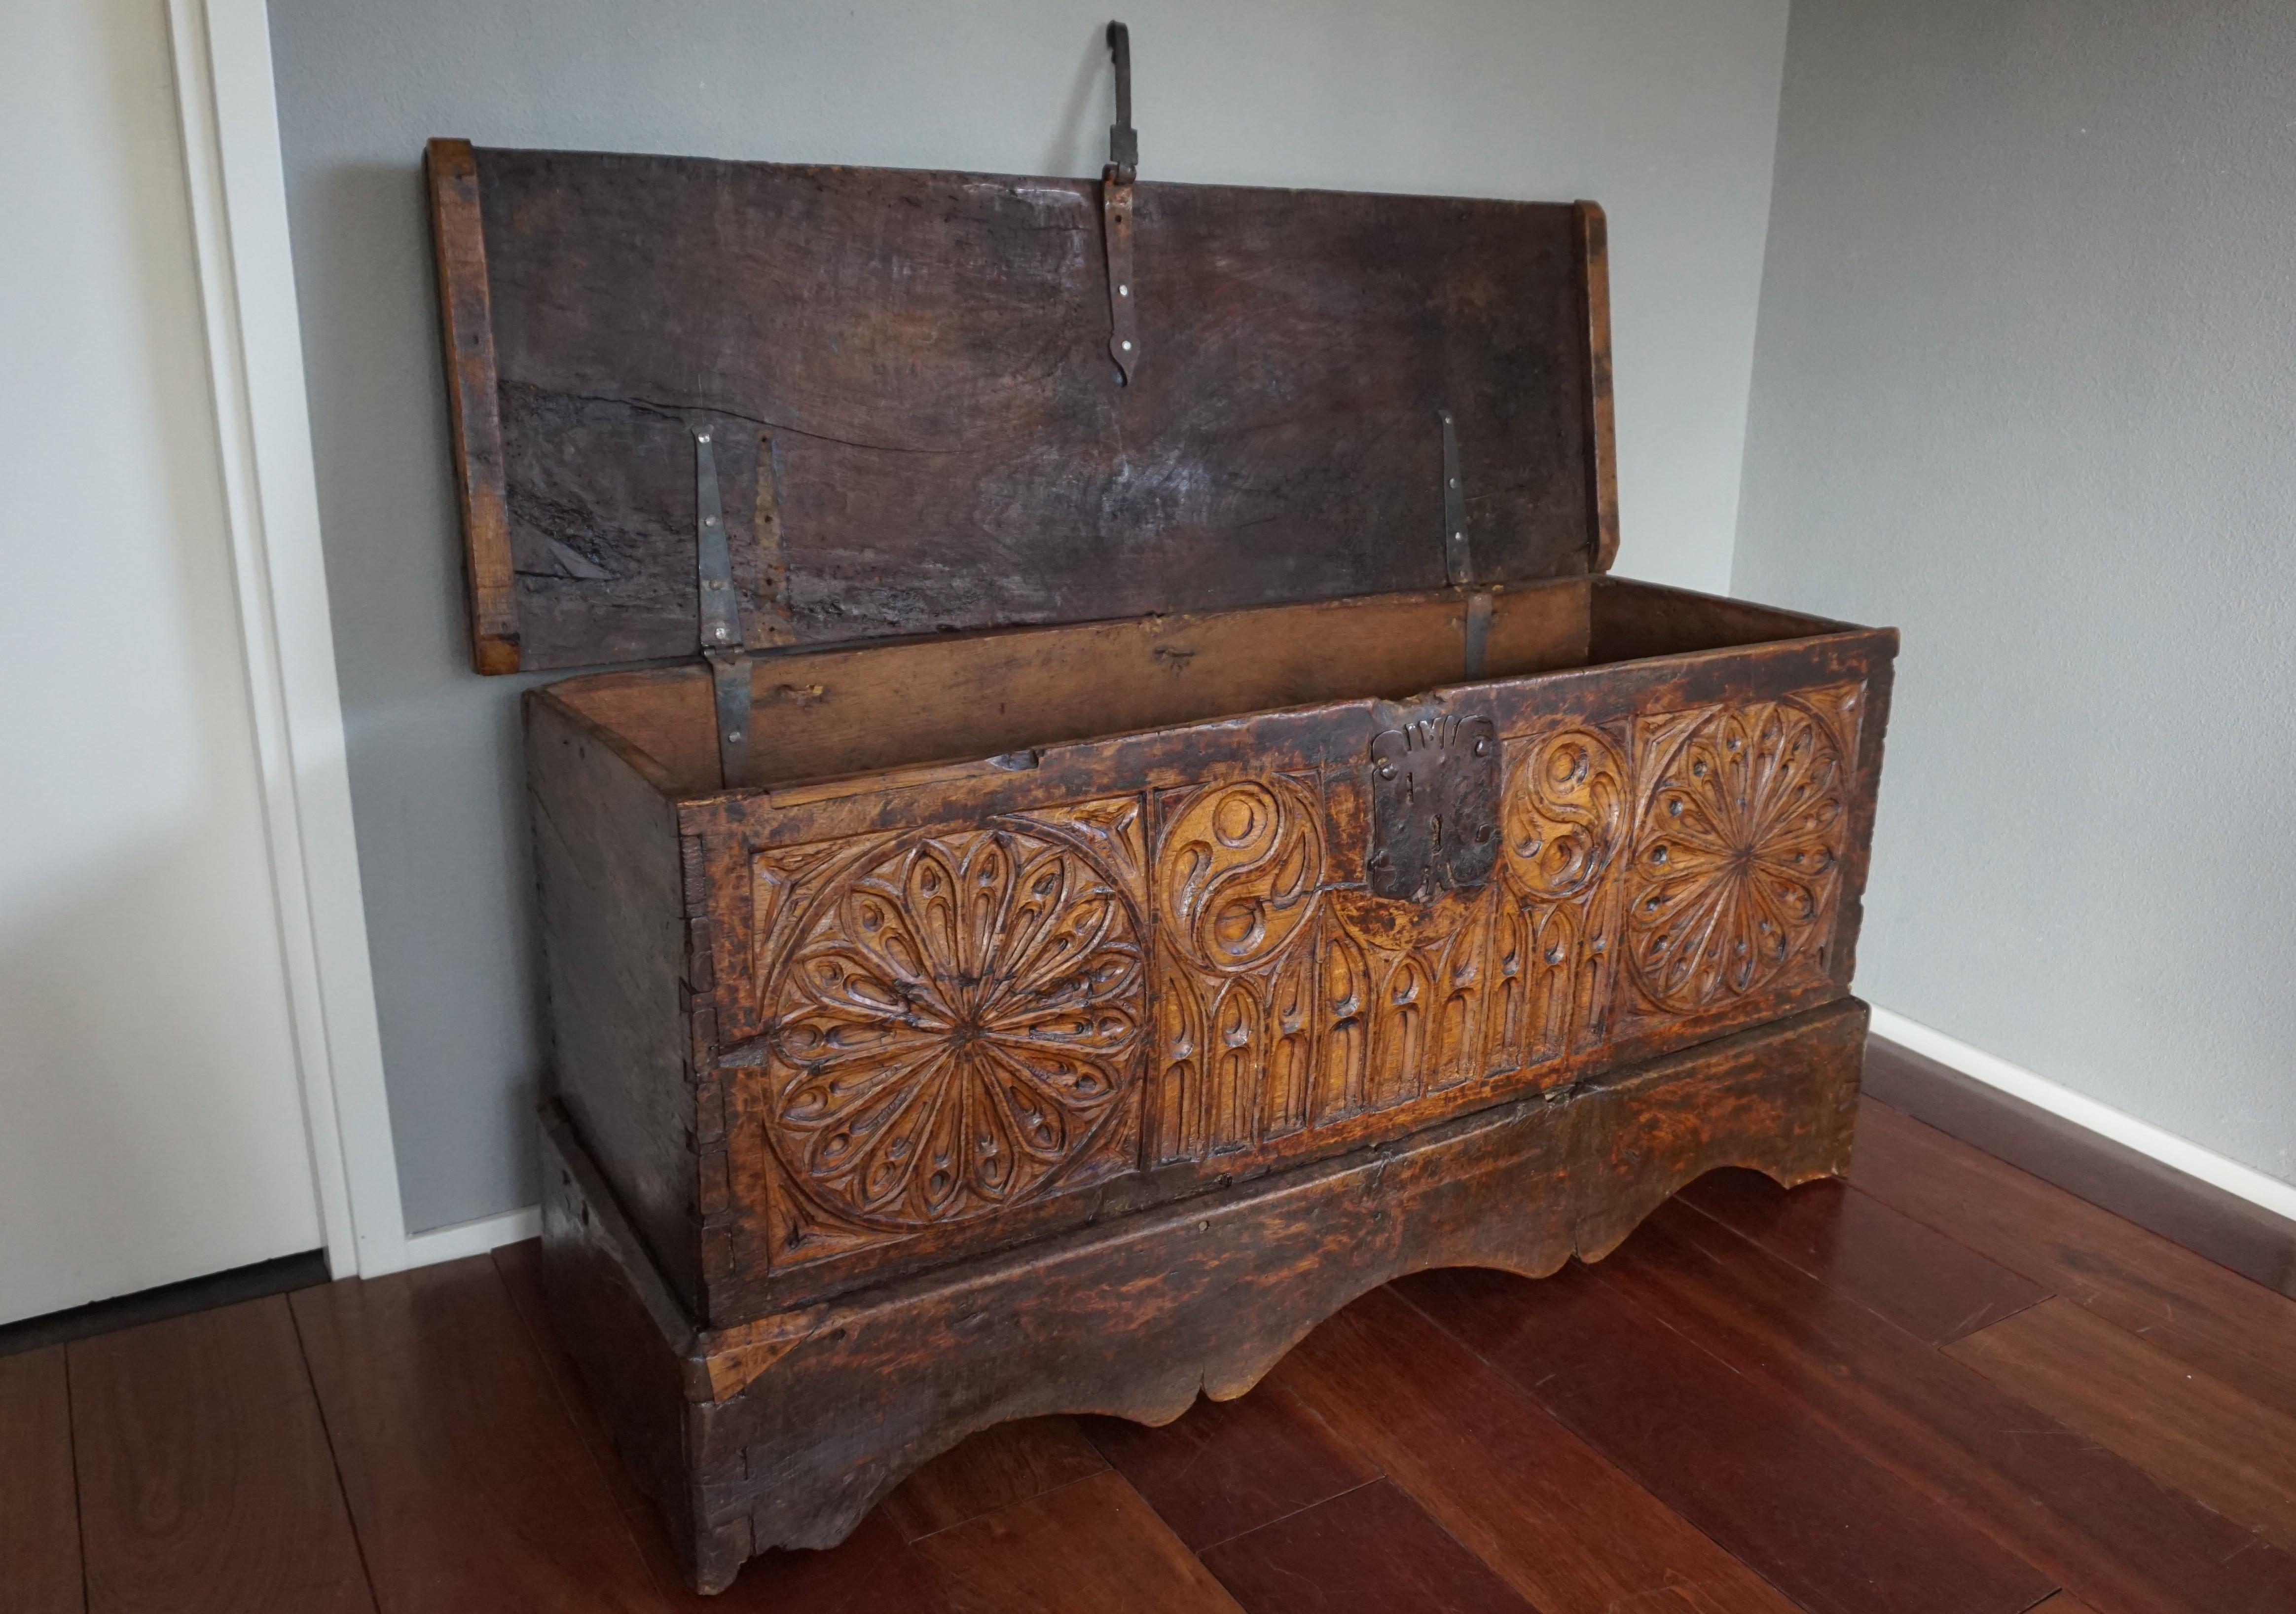 Antique Gothic Revival Blanket Chest / Trunk with an Amazing Patina 1680 - 1720 1